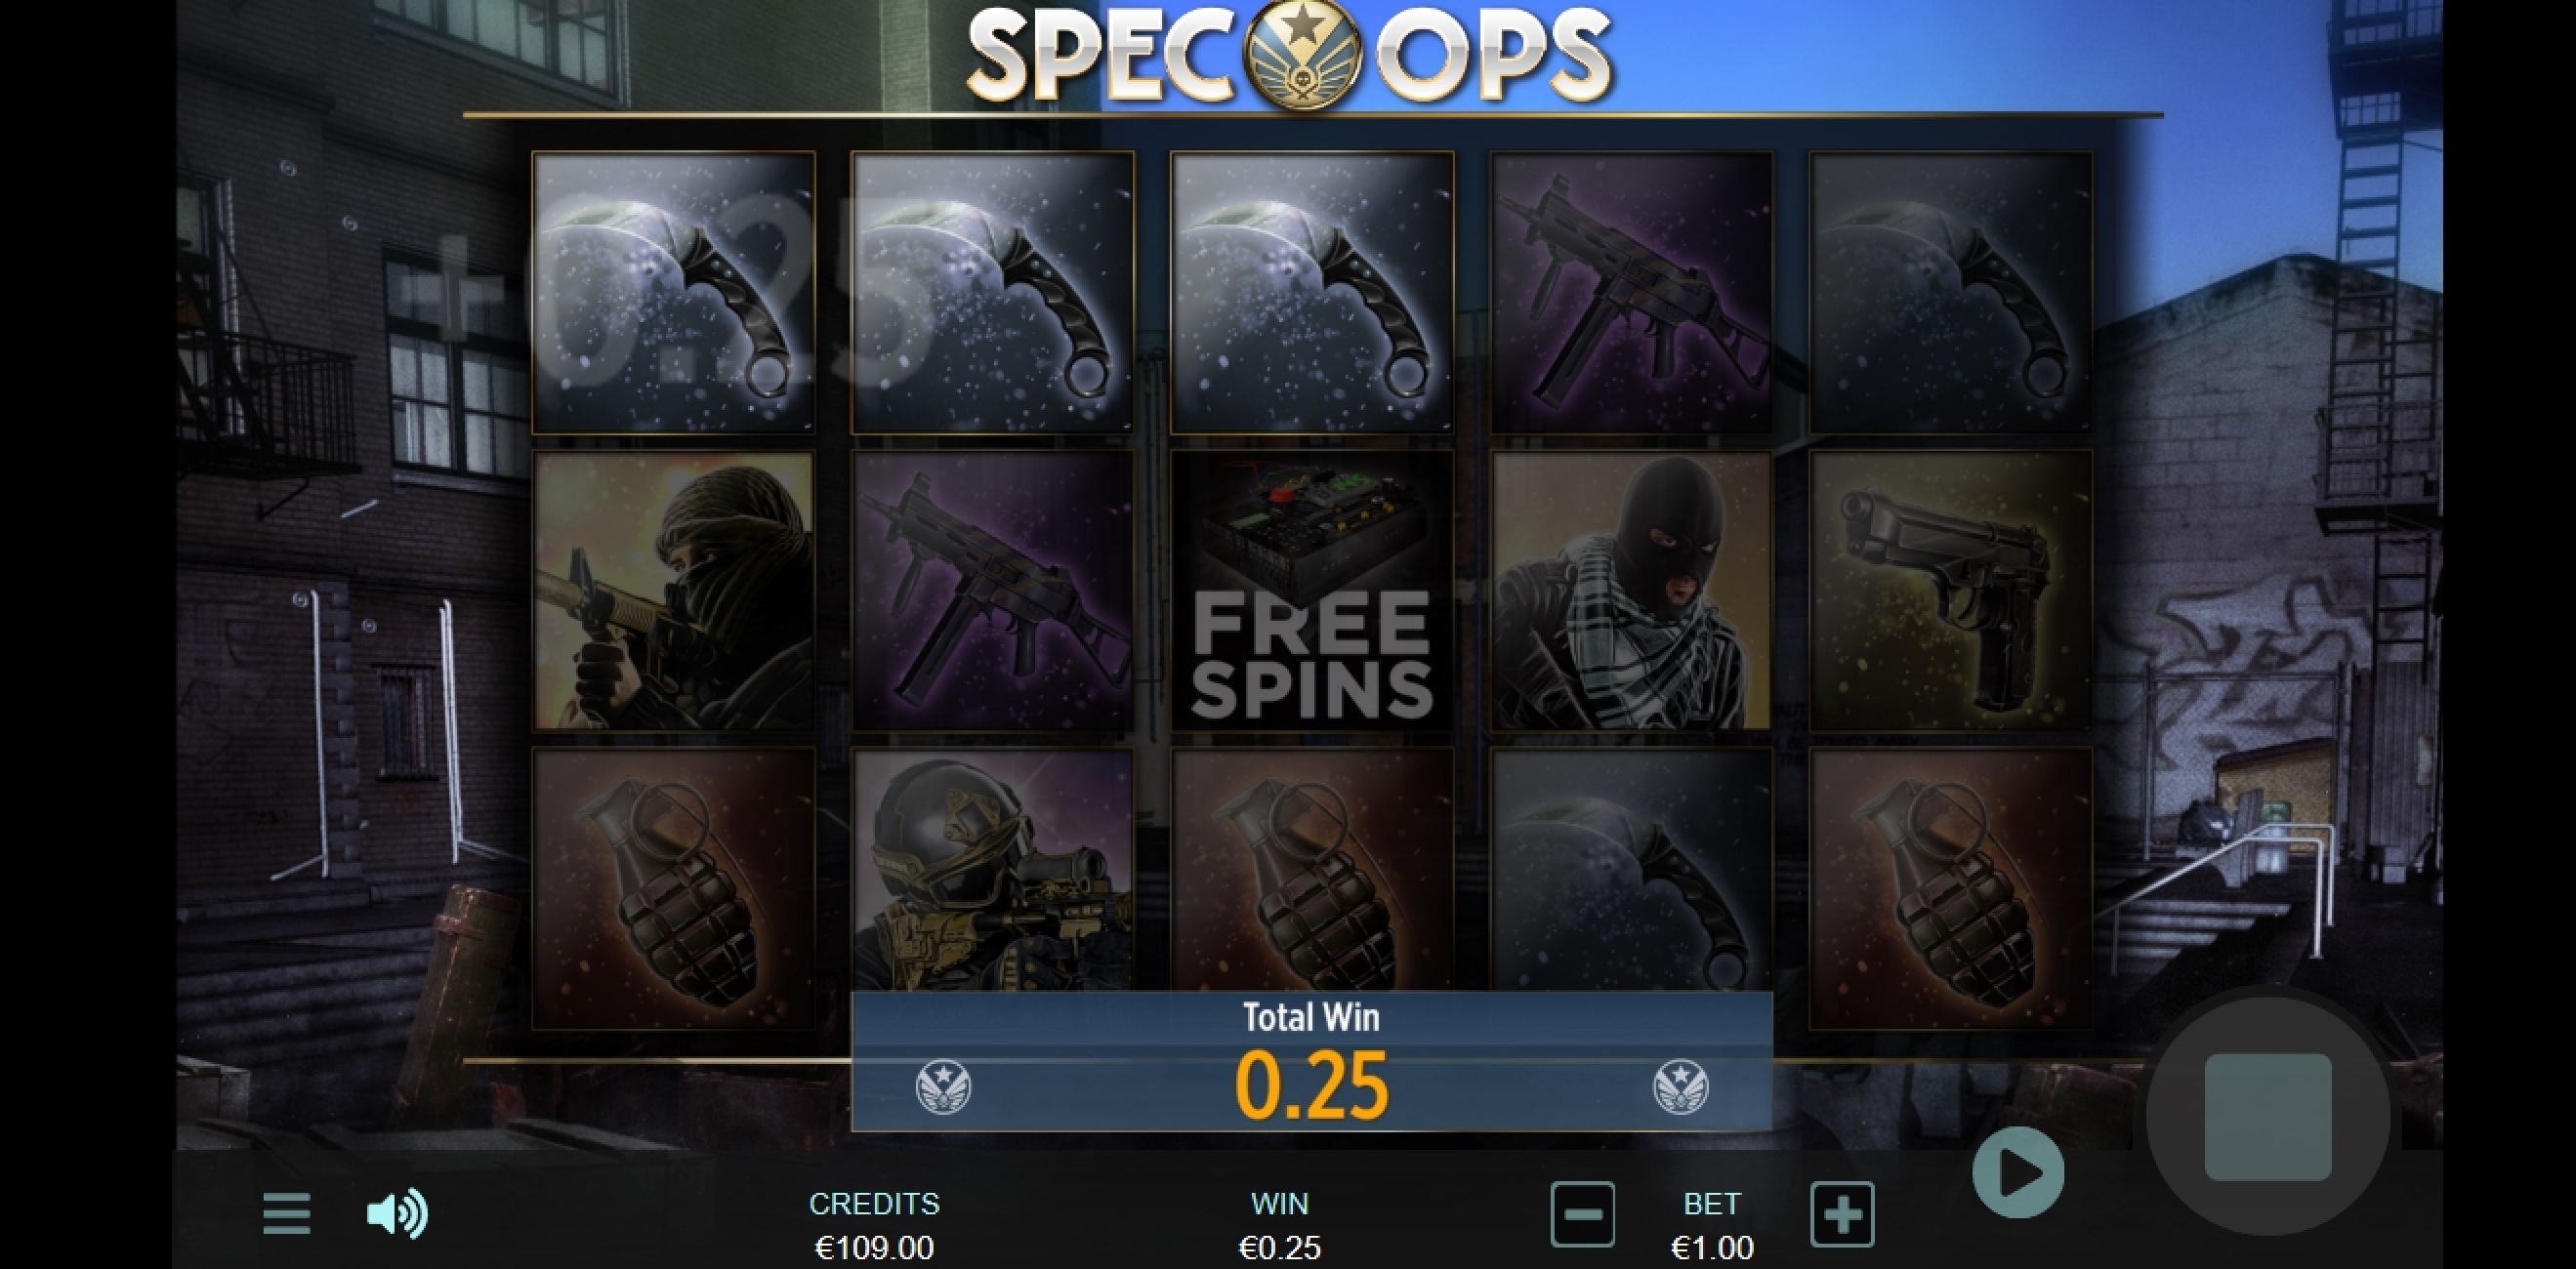 Win Money in Spec-Ops Free Slot Game by Cubeia